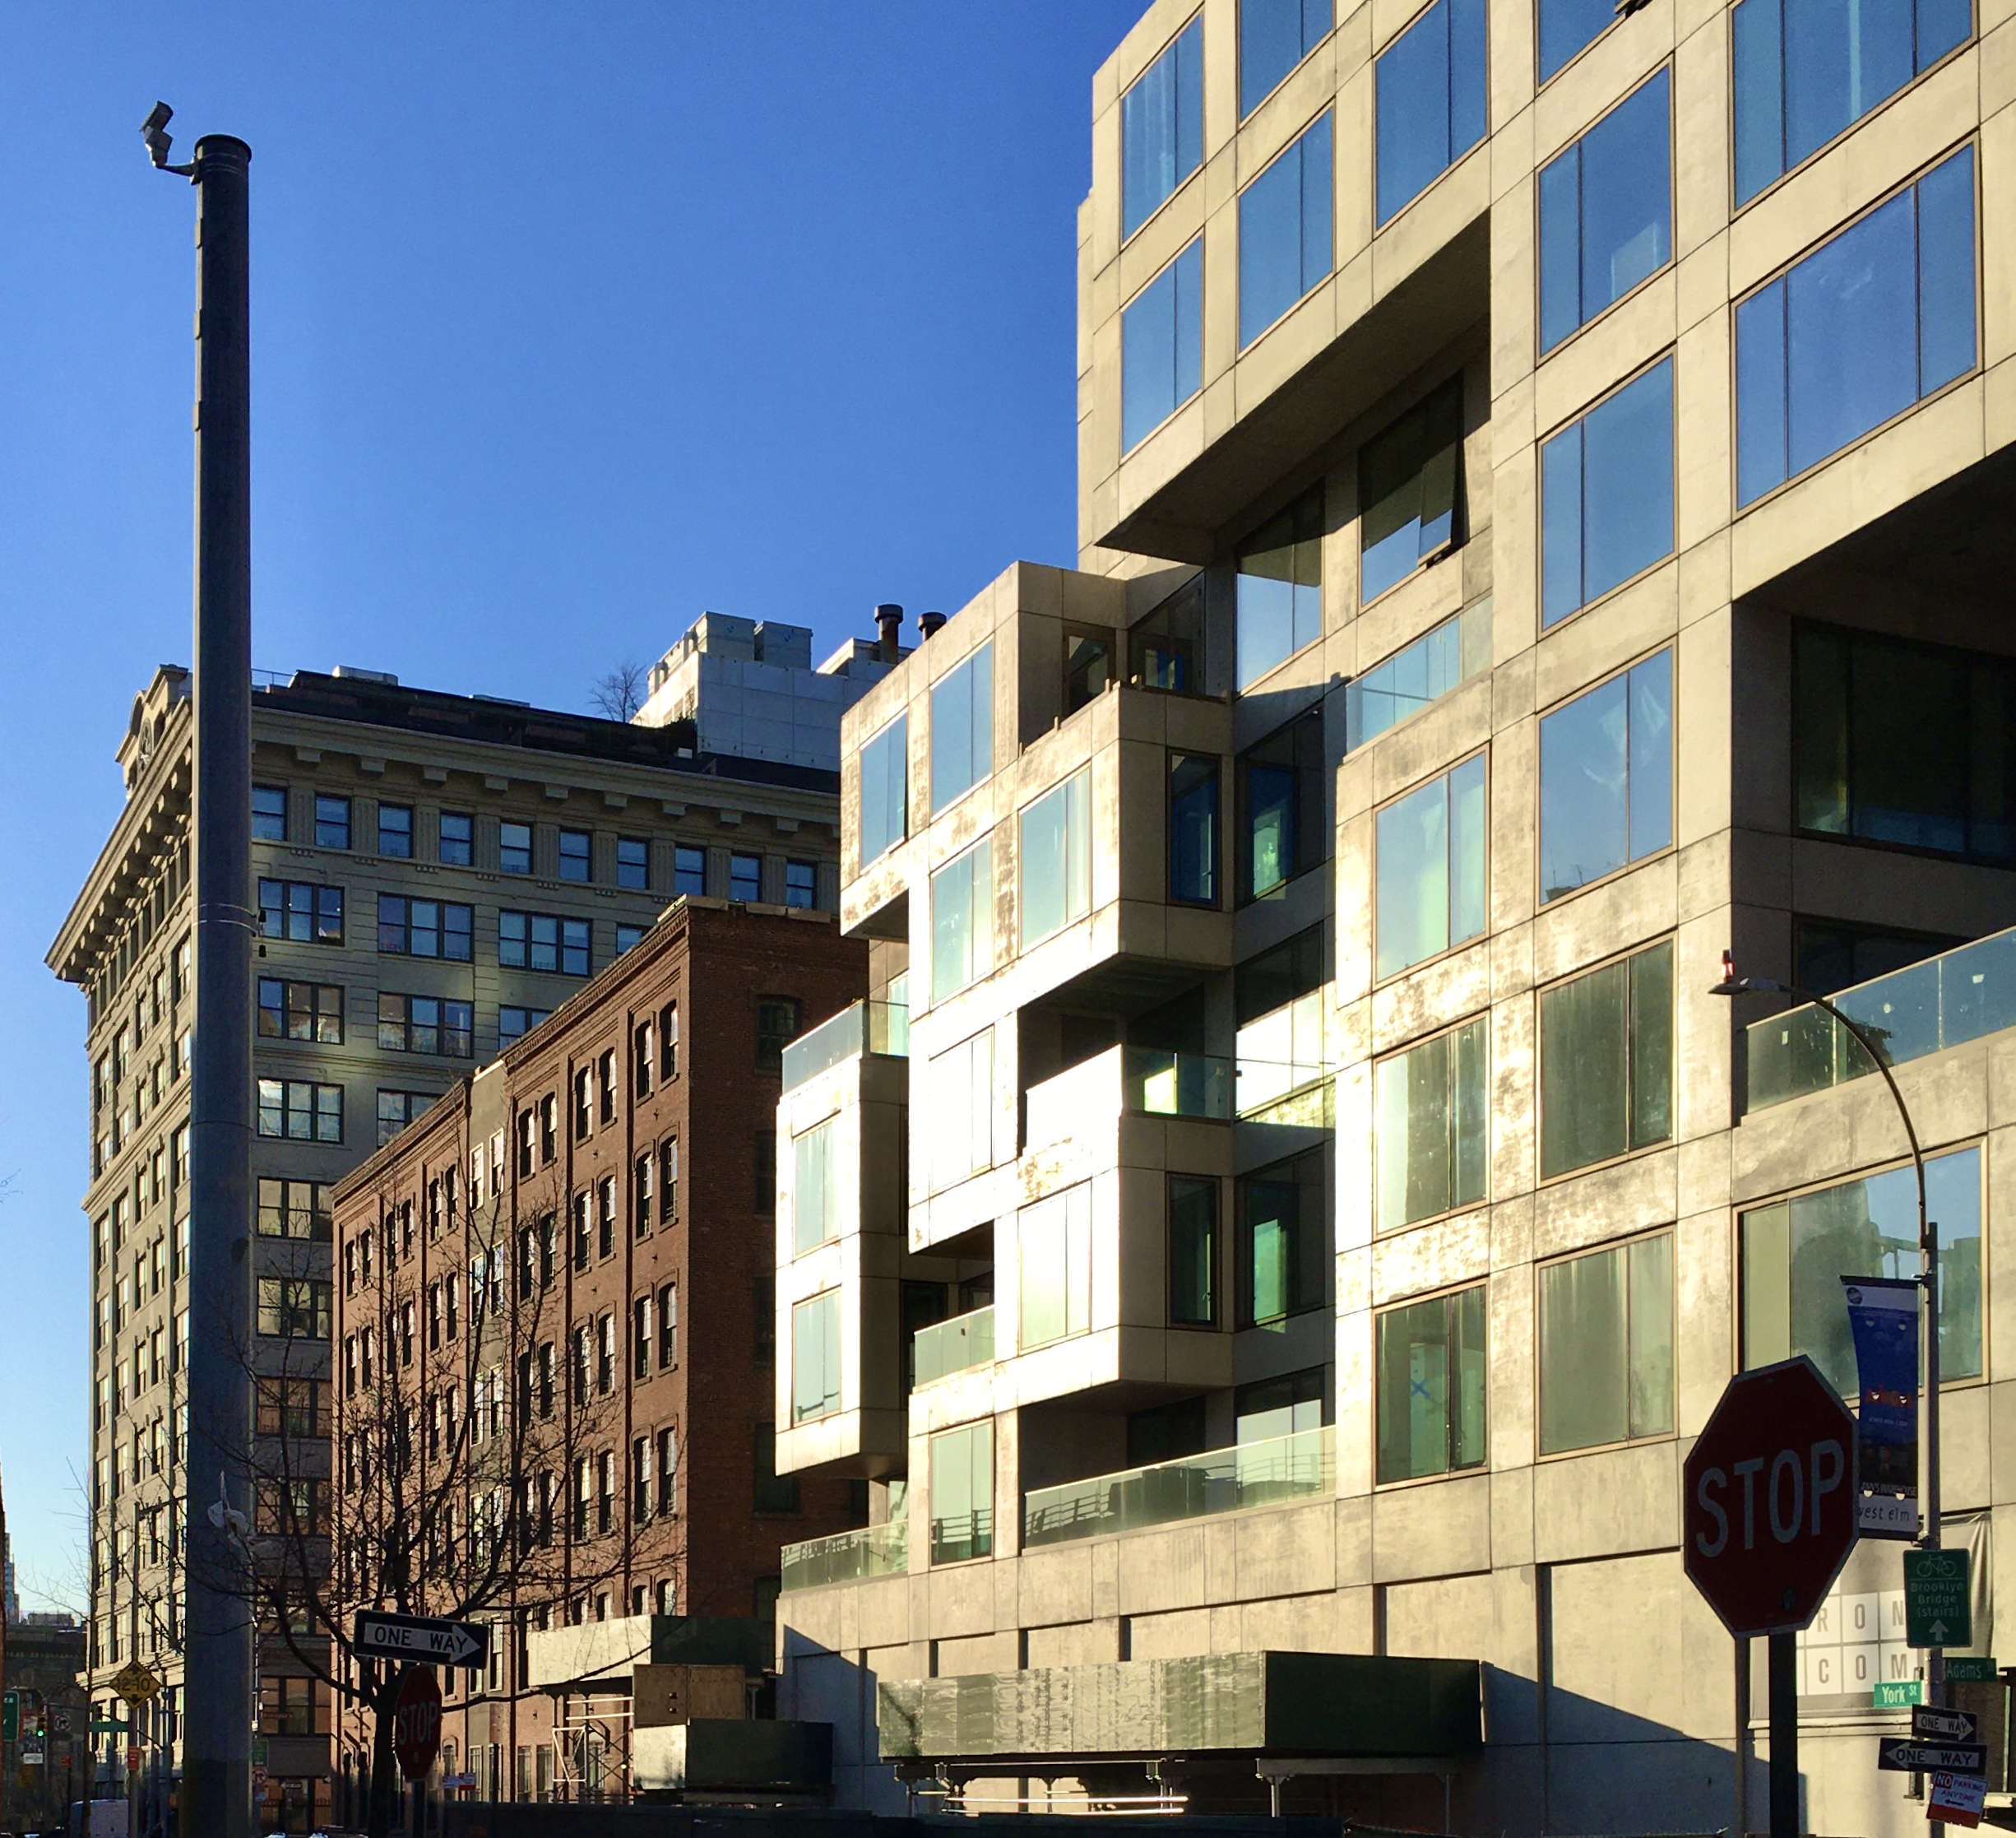 The concrete and glass building at right is 98 Front St. Photo: Lore Croghan/Brooklyn Eagle